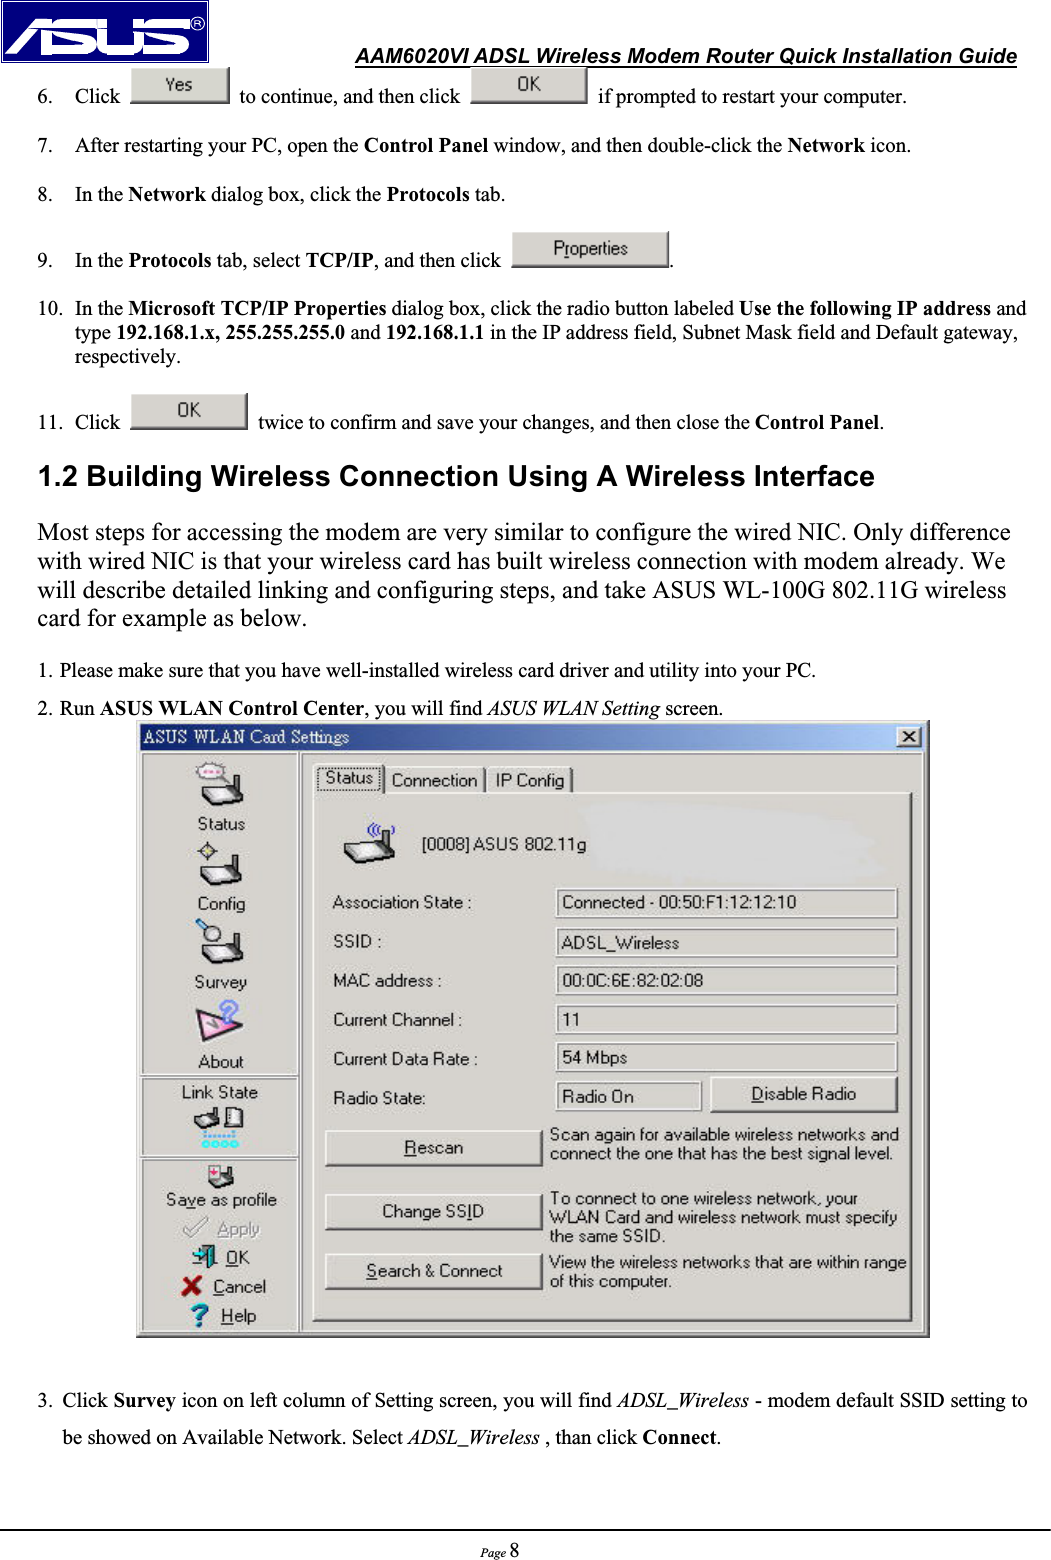               AAM6020VI ADSL Wireless Modem Router Quick Installation GuidePage 86. Click    to continue, and then click    if prompted to restart your computer. 7. After restarting your PC, open the Control Panel window, and then double-click the Network icon. 8. In the Network dialog box, click the Protocols tab. 9. In the Protocols tab, select TCP/IP, and then click  .10. In the Microsoft TCP/IP Properties dialog box, click the radio button labeled Use the following IP address and type 192.168.1.x, 255.255.255.0 and 192.168.1.1 in the IP address field, Subnet Mask field and Default gateway, respectively.11. Click    twice to confirm and save your changes, and then close the Control Panel.1.2 Building Wireless Connection Using A Wireless Interface Most steps for accessing the modem are very similar to configure the wired NIC. Only difference with wired NIC is that your wireless card has built wireless connection with modem already. We will describe detailed linking and configuring steps, and take ASUS WL-100G 802.11G wireless card for example as below. 1. Please make sure that you have well-installed wireless card driver and utility into your PC.     2. Run ASUS WLAN Control Center, you will find ASUS WLAN Setting screen.     3. Click Survey icon on left column of Setting screen, you will find ADSL_Wireless - modem default SSID setting to be showed on Available Network. Select ADSL_Wireless , than click Connect.